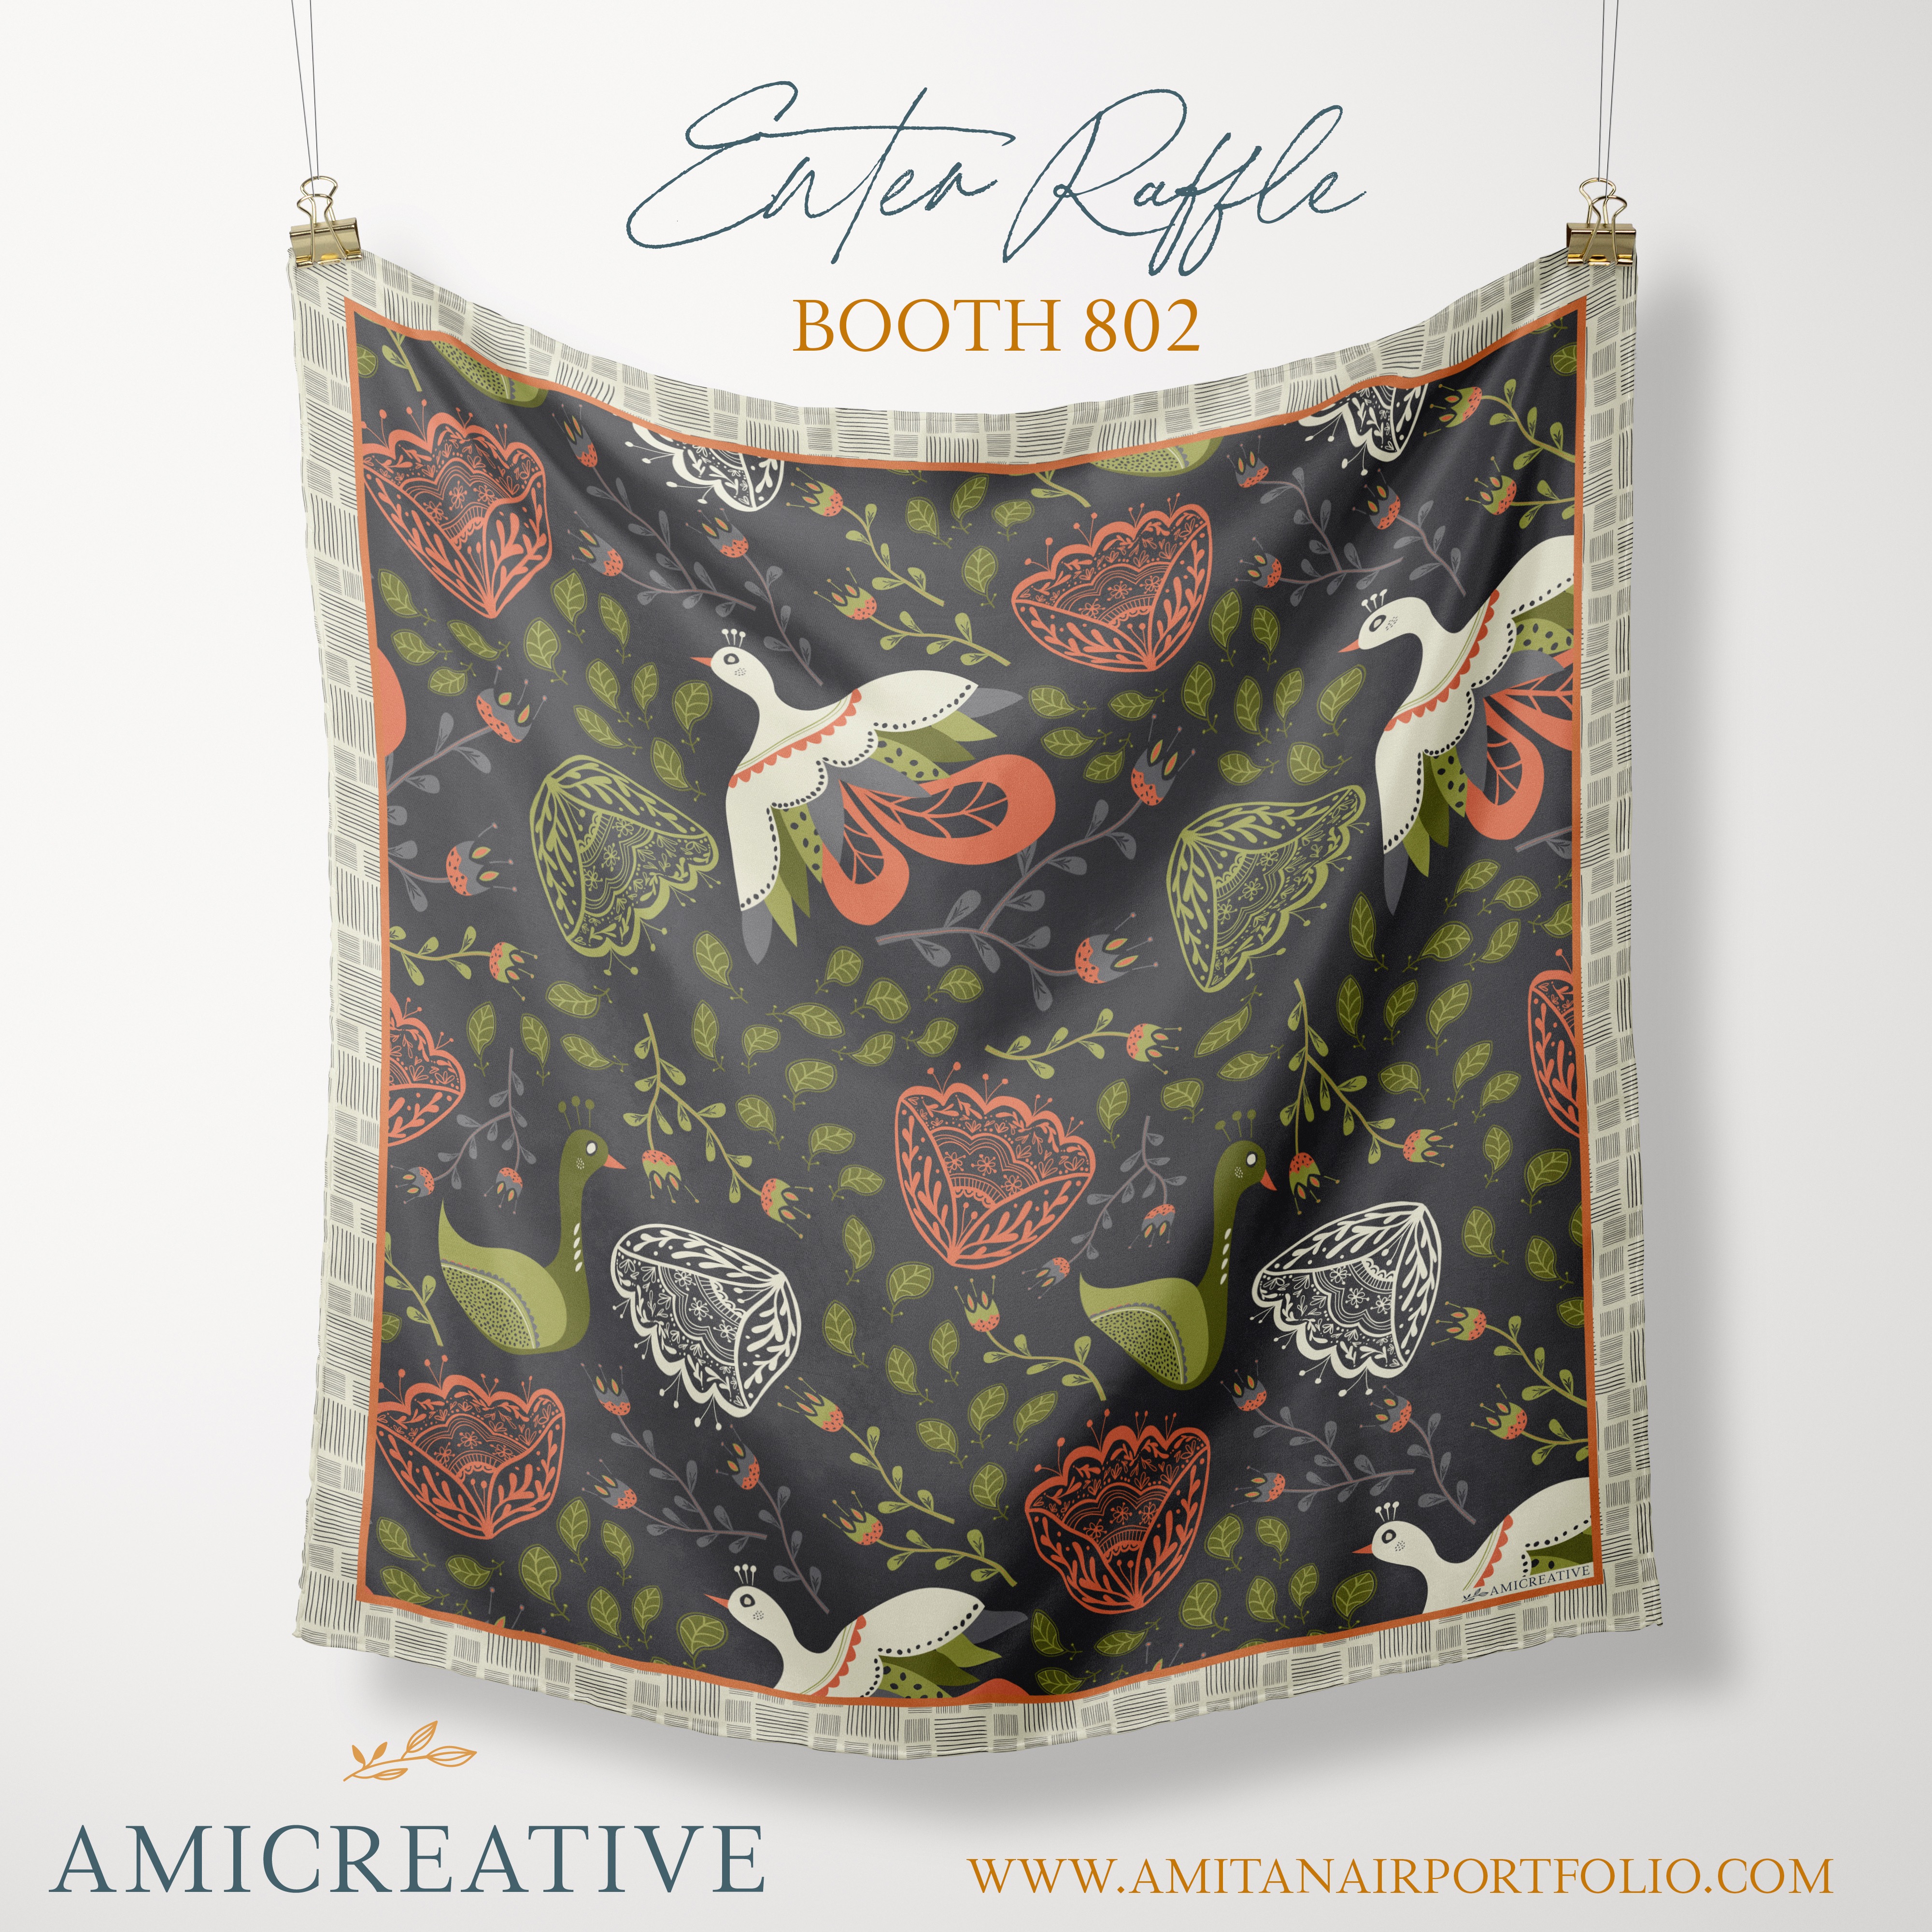 Enter a change to win a beautiful SILK SCARF at Booth 802! 331